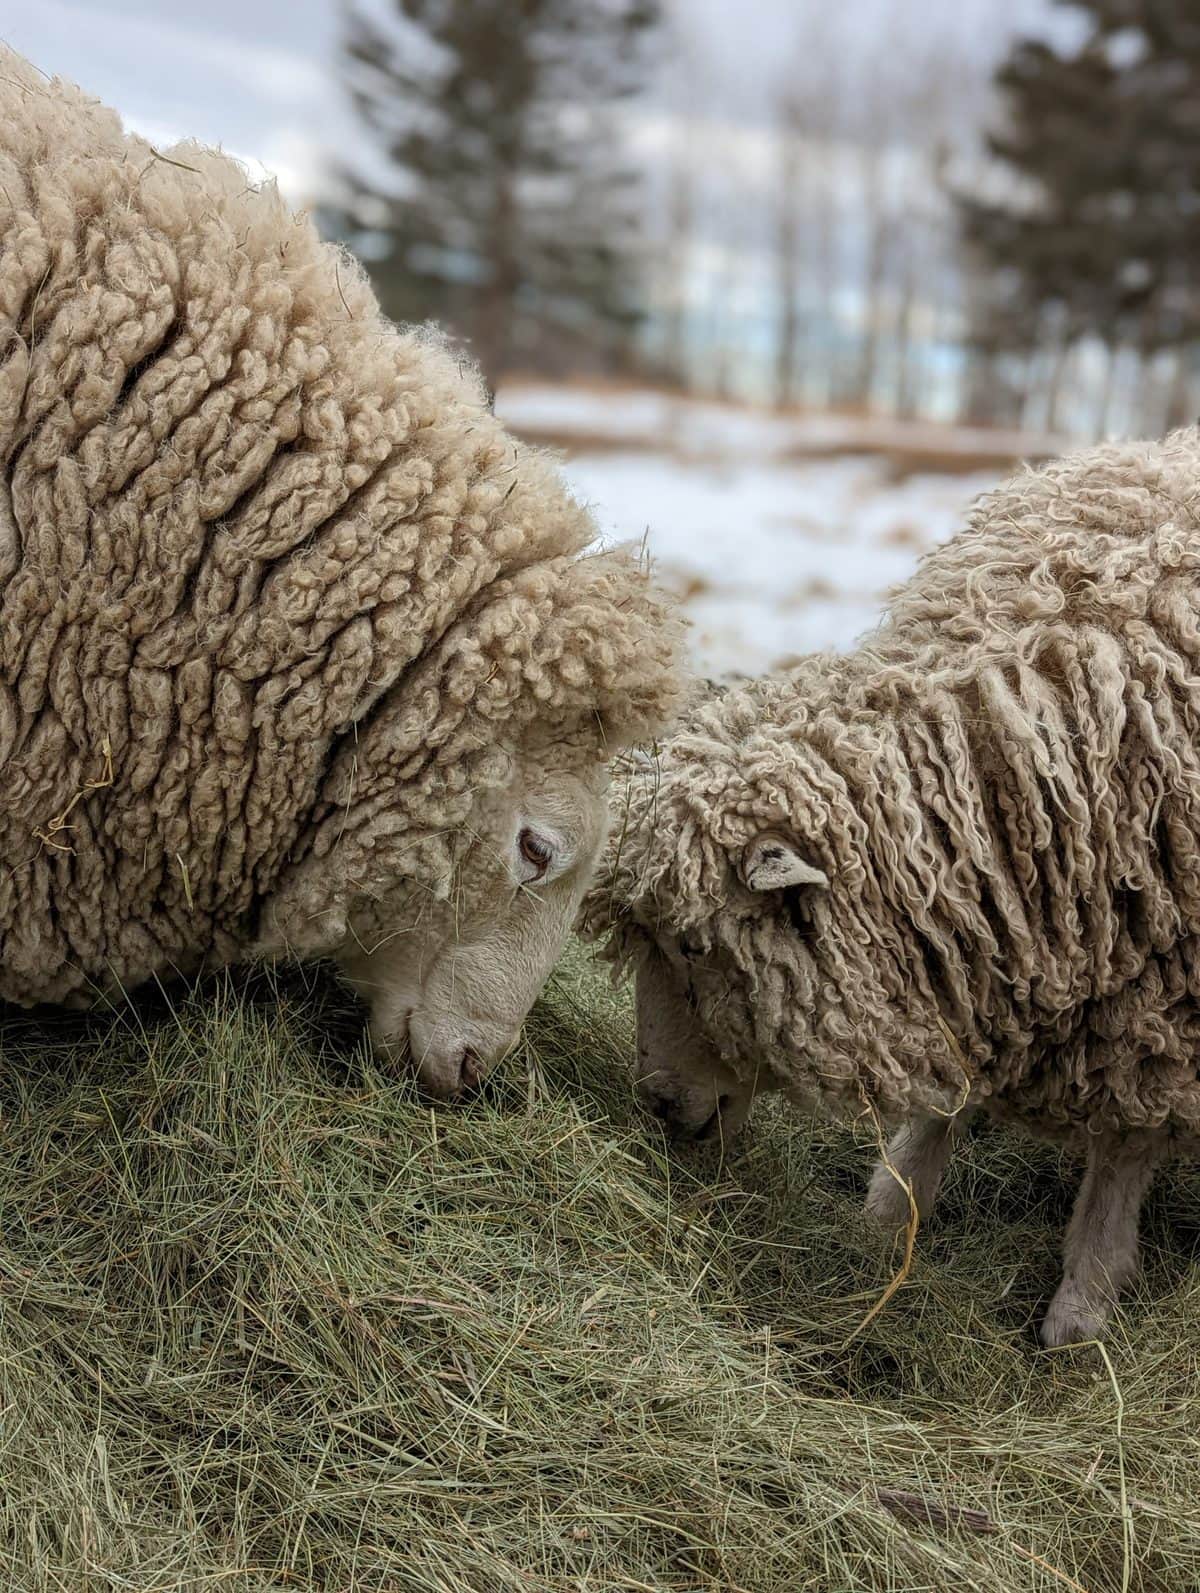 image: two shaggy sheep, grazing close together